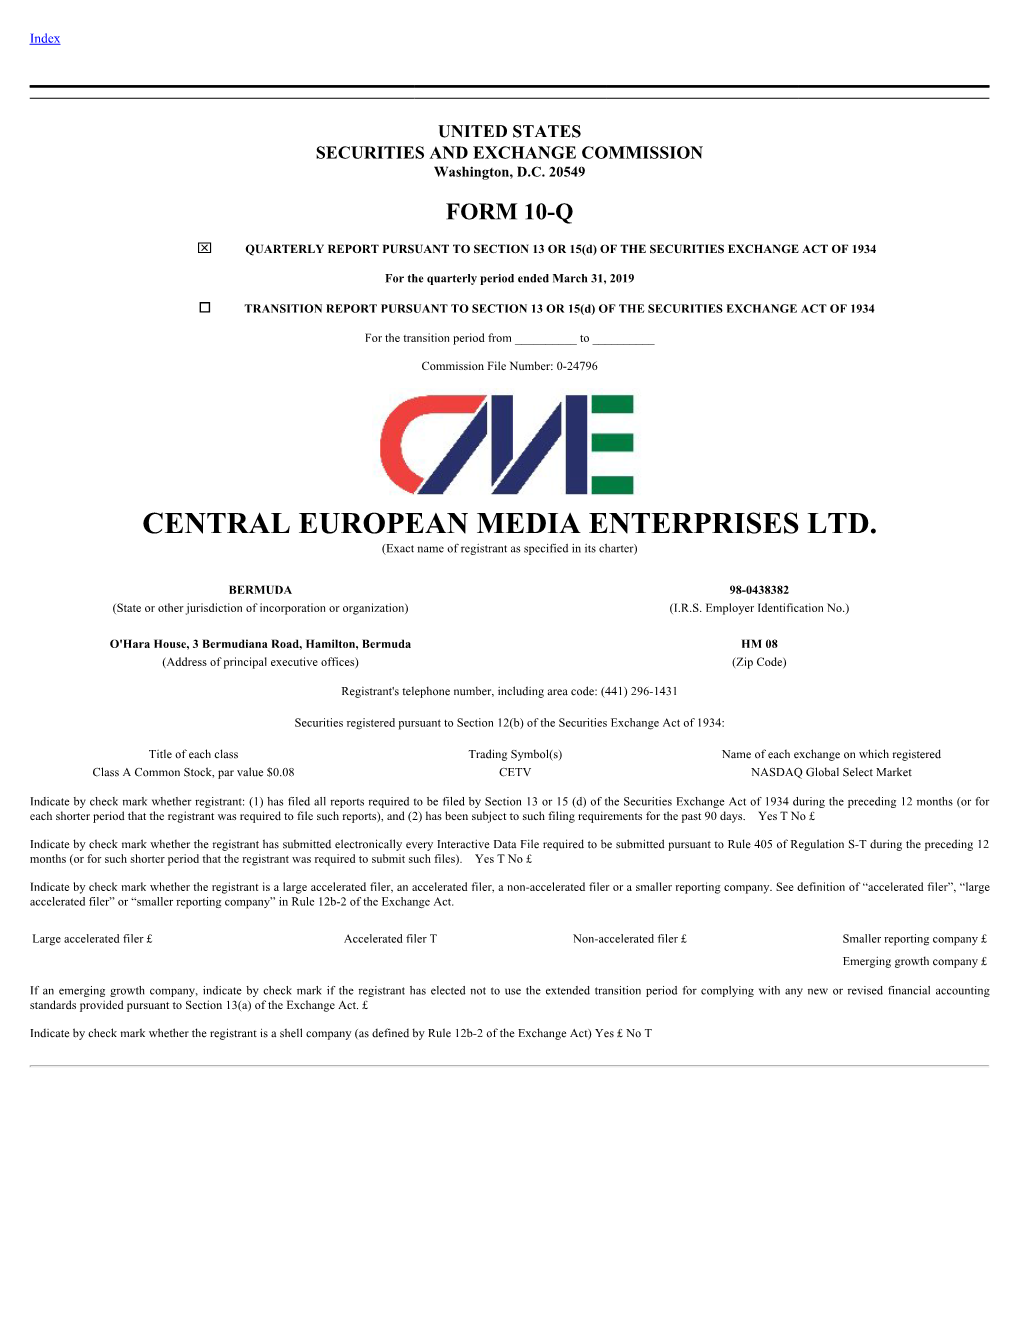 CENTRAL EUROPEAN MEDIA ENTERPRISES LTD. (Exact Name of Registrant As Specified in Its Charter)